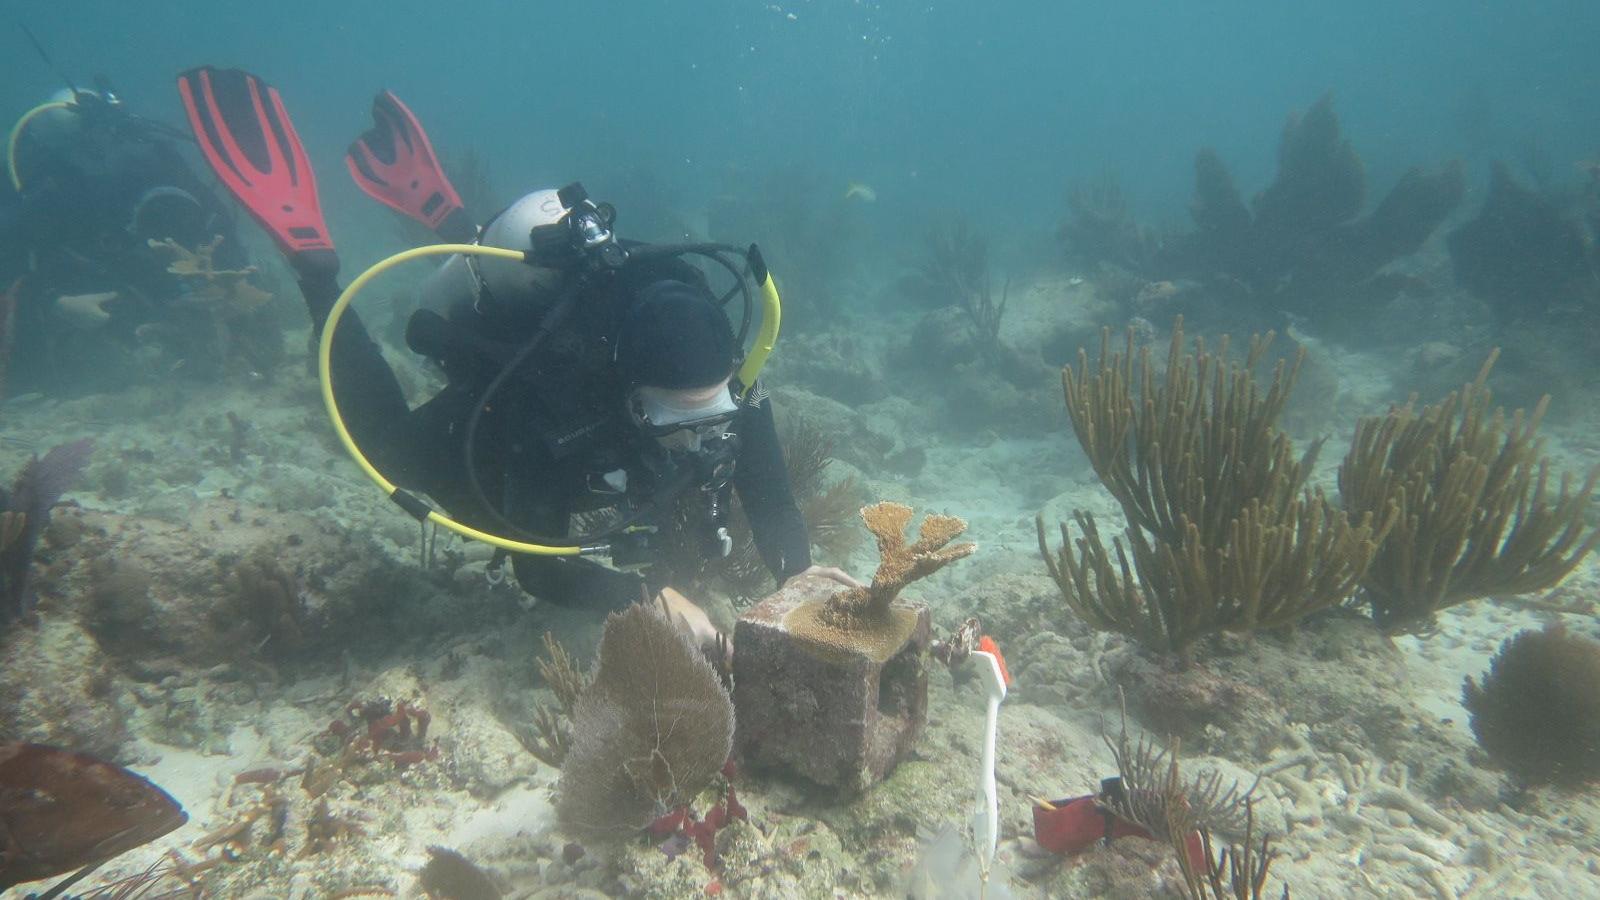 Dr Ilsa Kuffner collecting corals on scuba